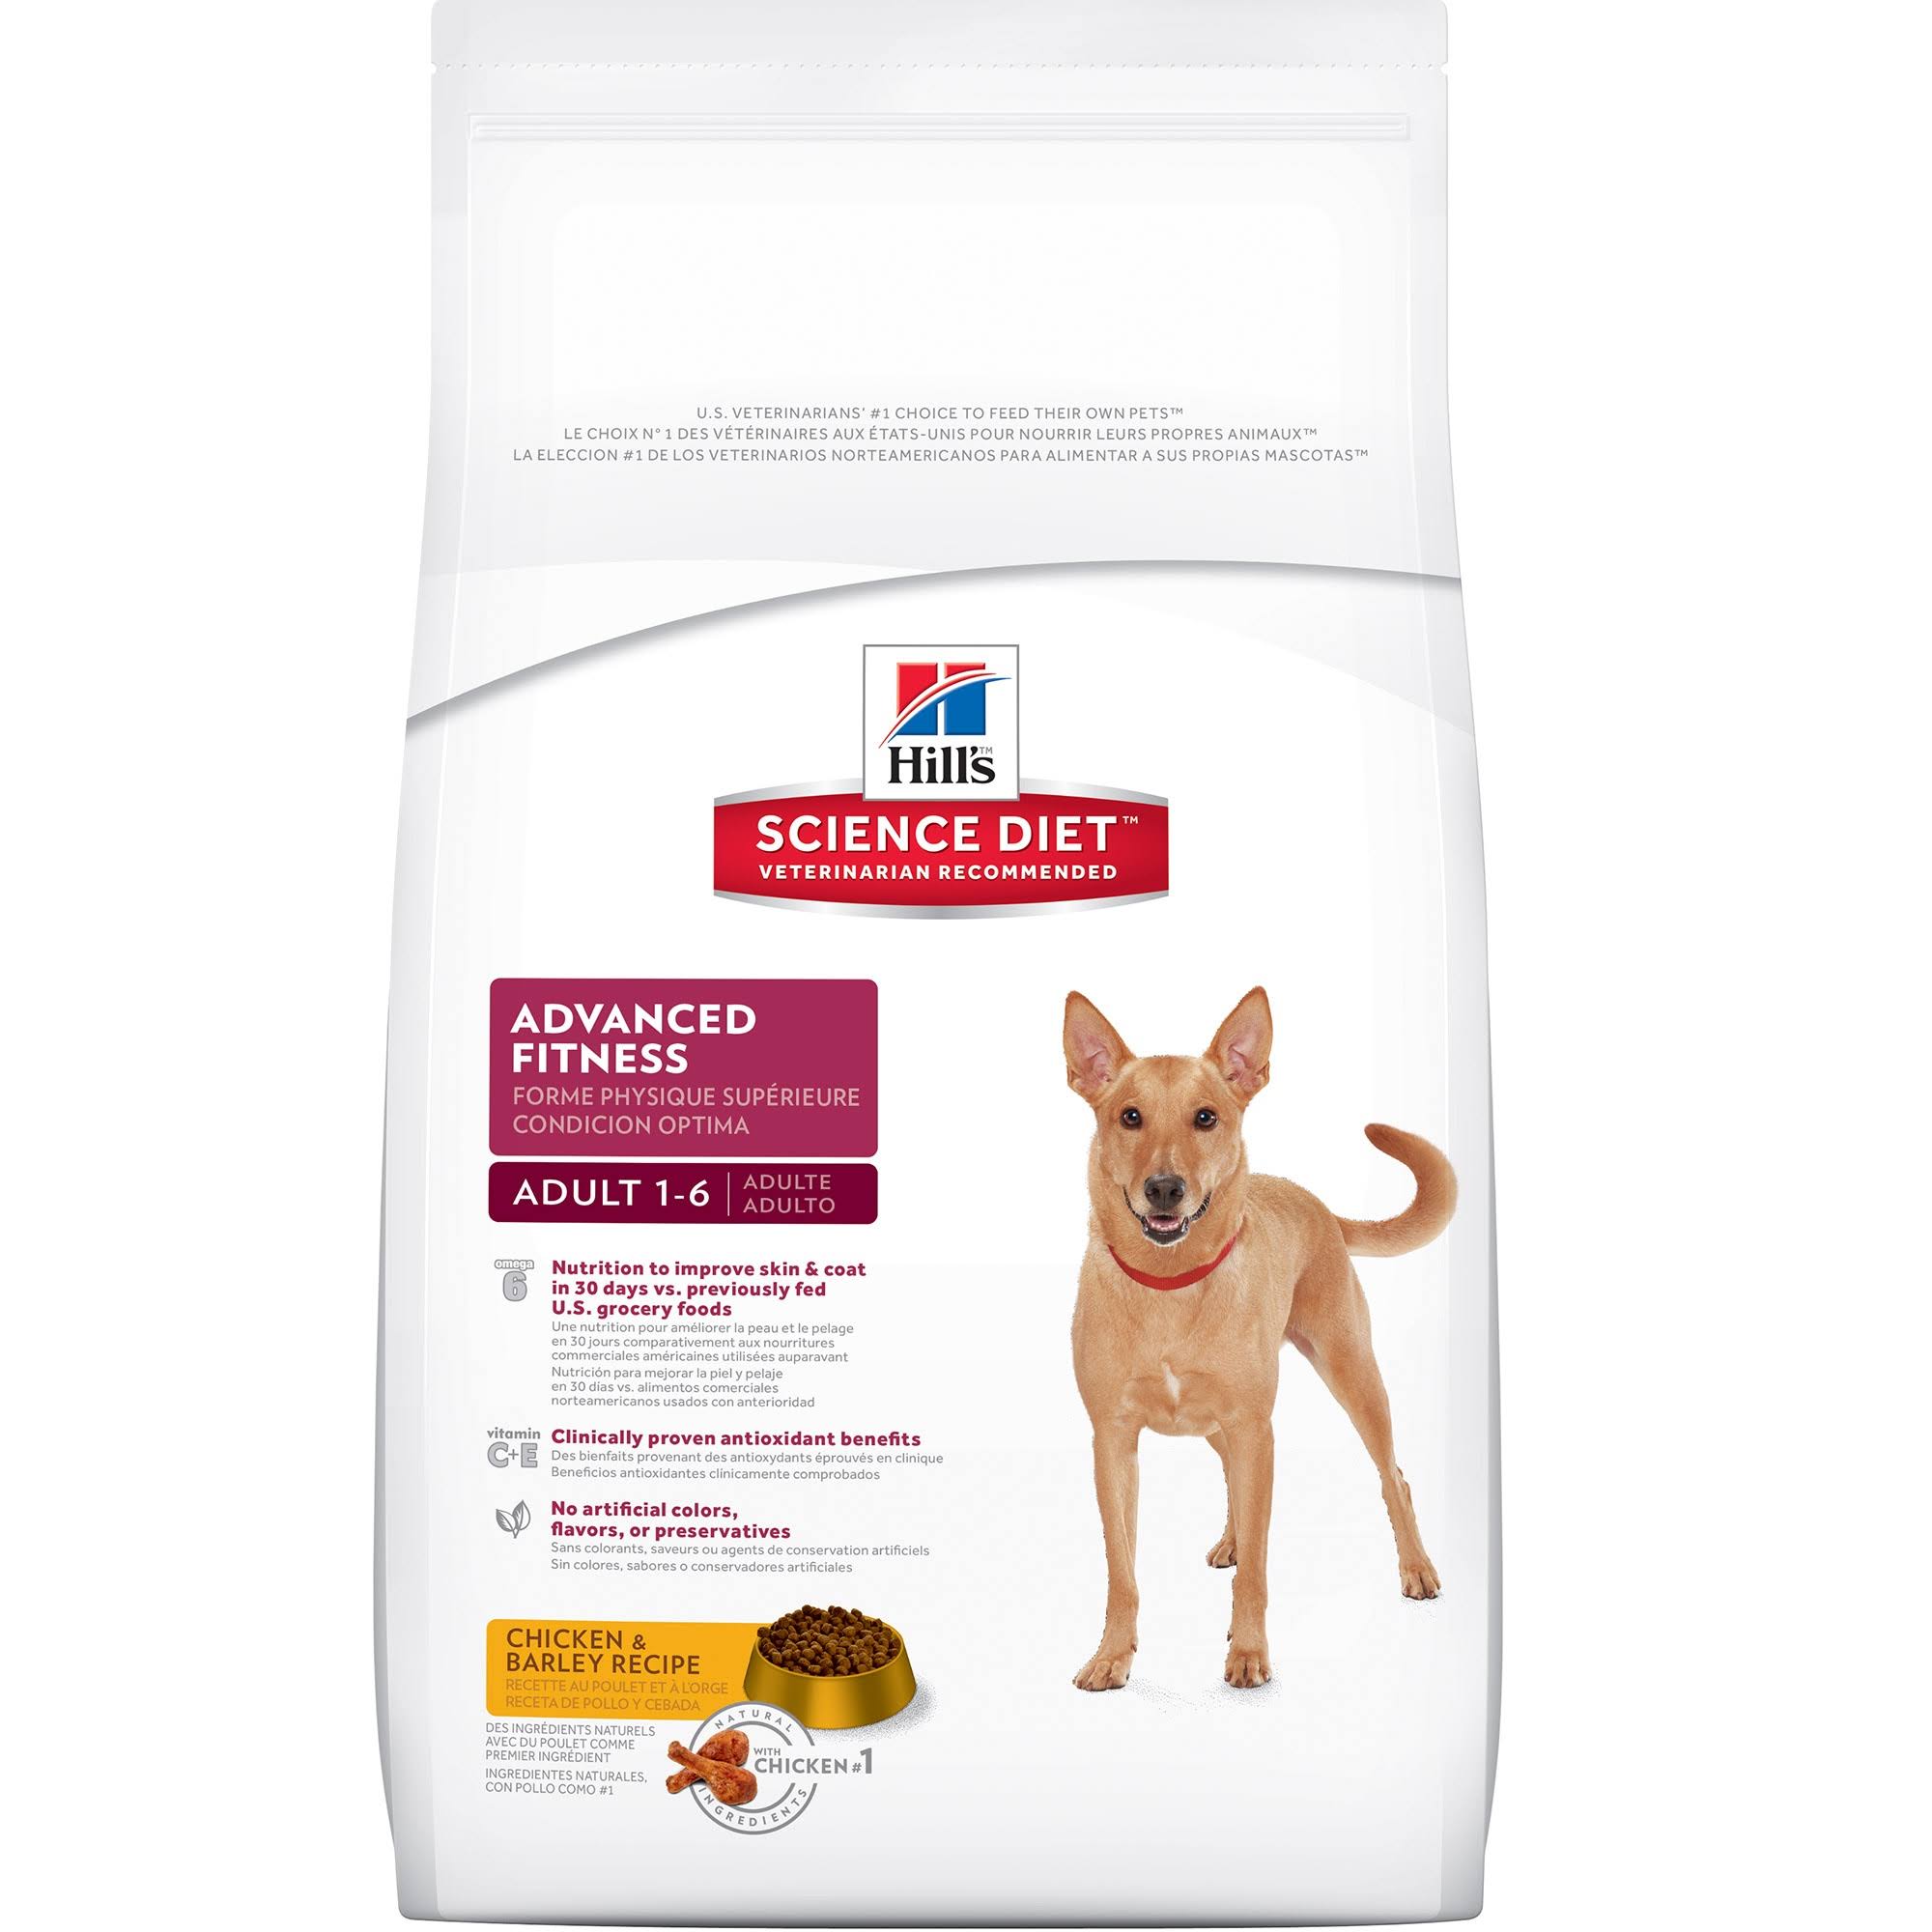 Hill's Science Diet Adult 1-6 Advanced Fitness Premium Natural Dog Food - Chicken Barley Recipe, 5lbs